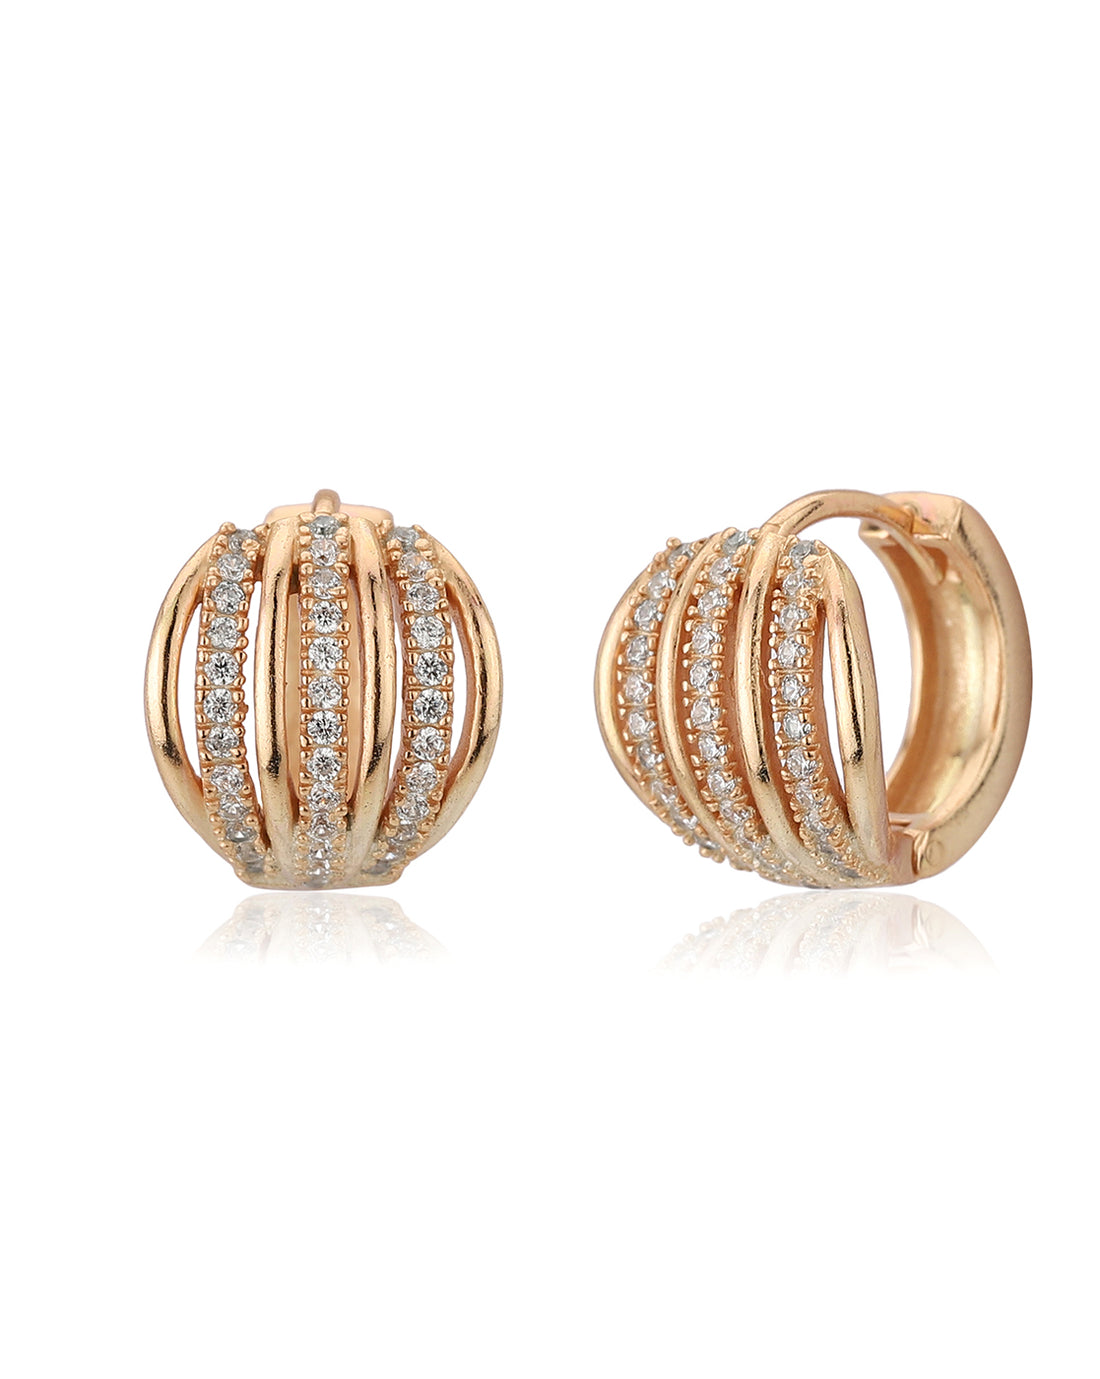 Carlton London Rose Gold Plated Cz Contemporary Hoop Earring For Women